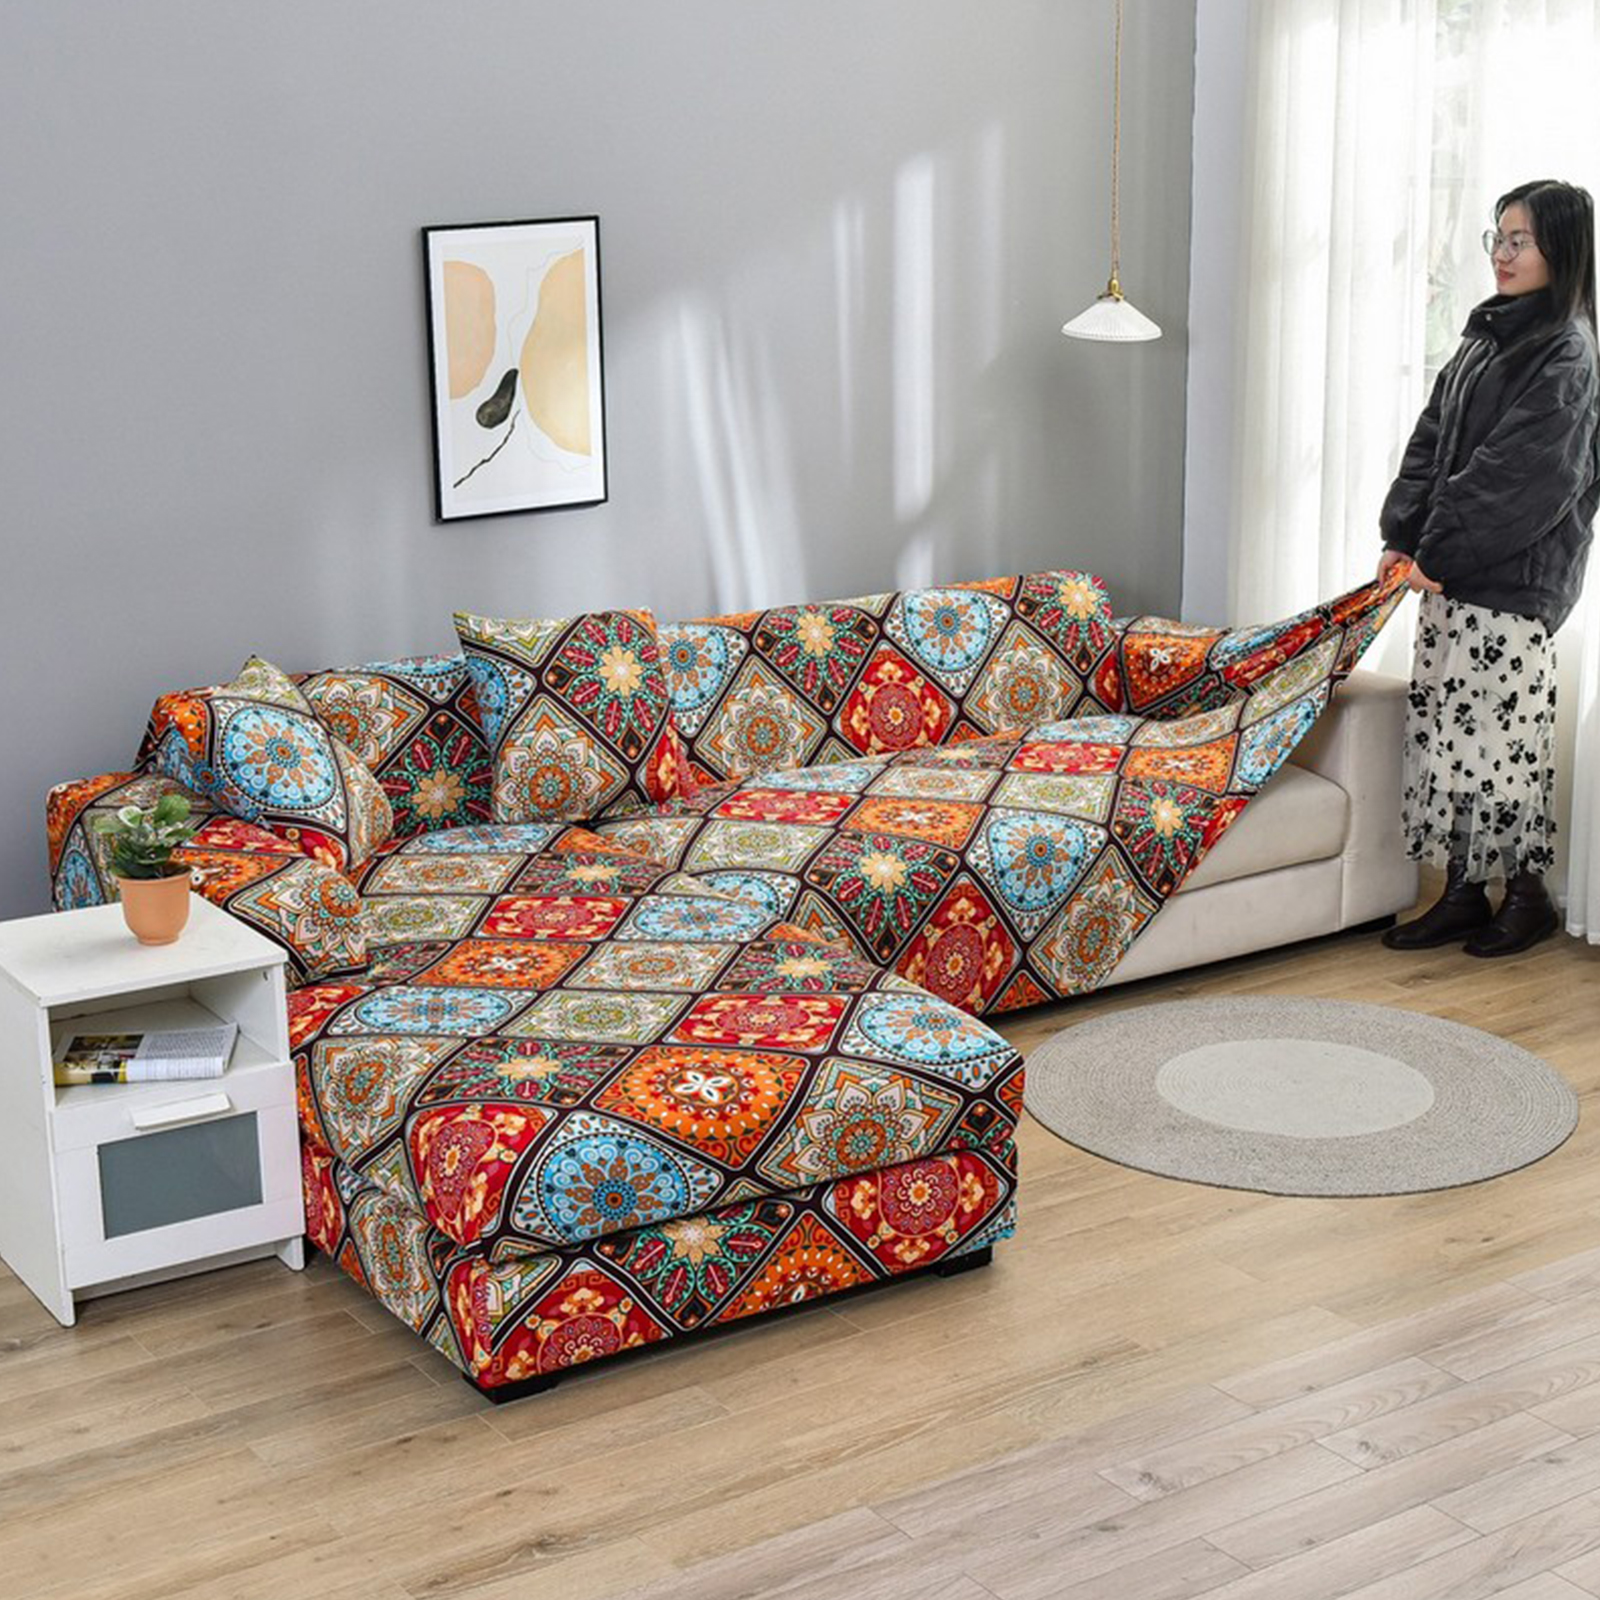 2-Piece L-Shaped Soft Stretch Printed Sofa Set For Three Persons, Washable For All Seasons, with 2 Pillowcases